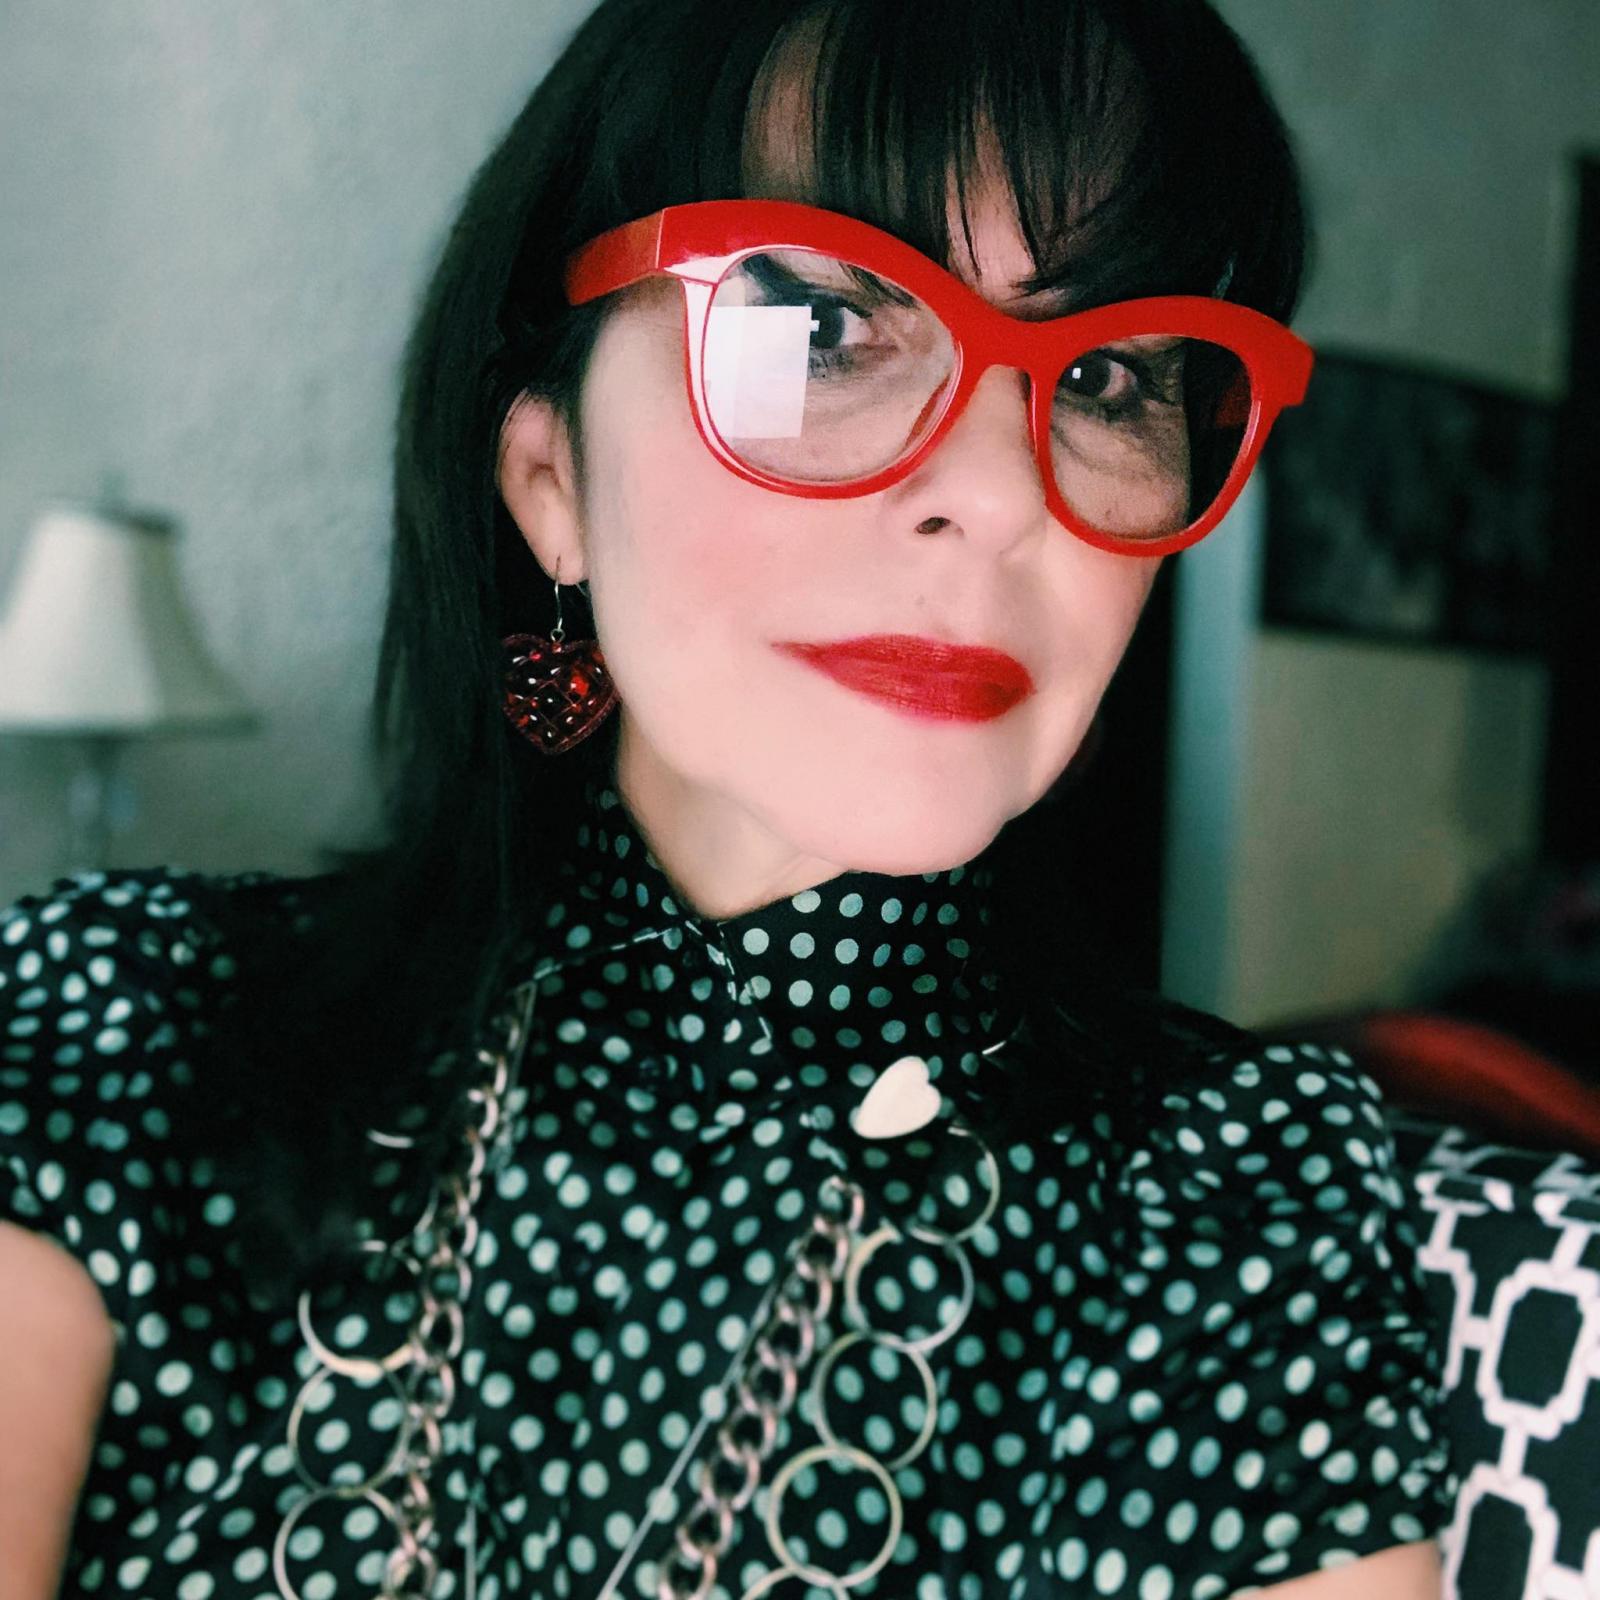 Woman with black hair and red glasses in a polka dot shirt with collar smirks at camera